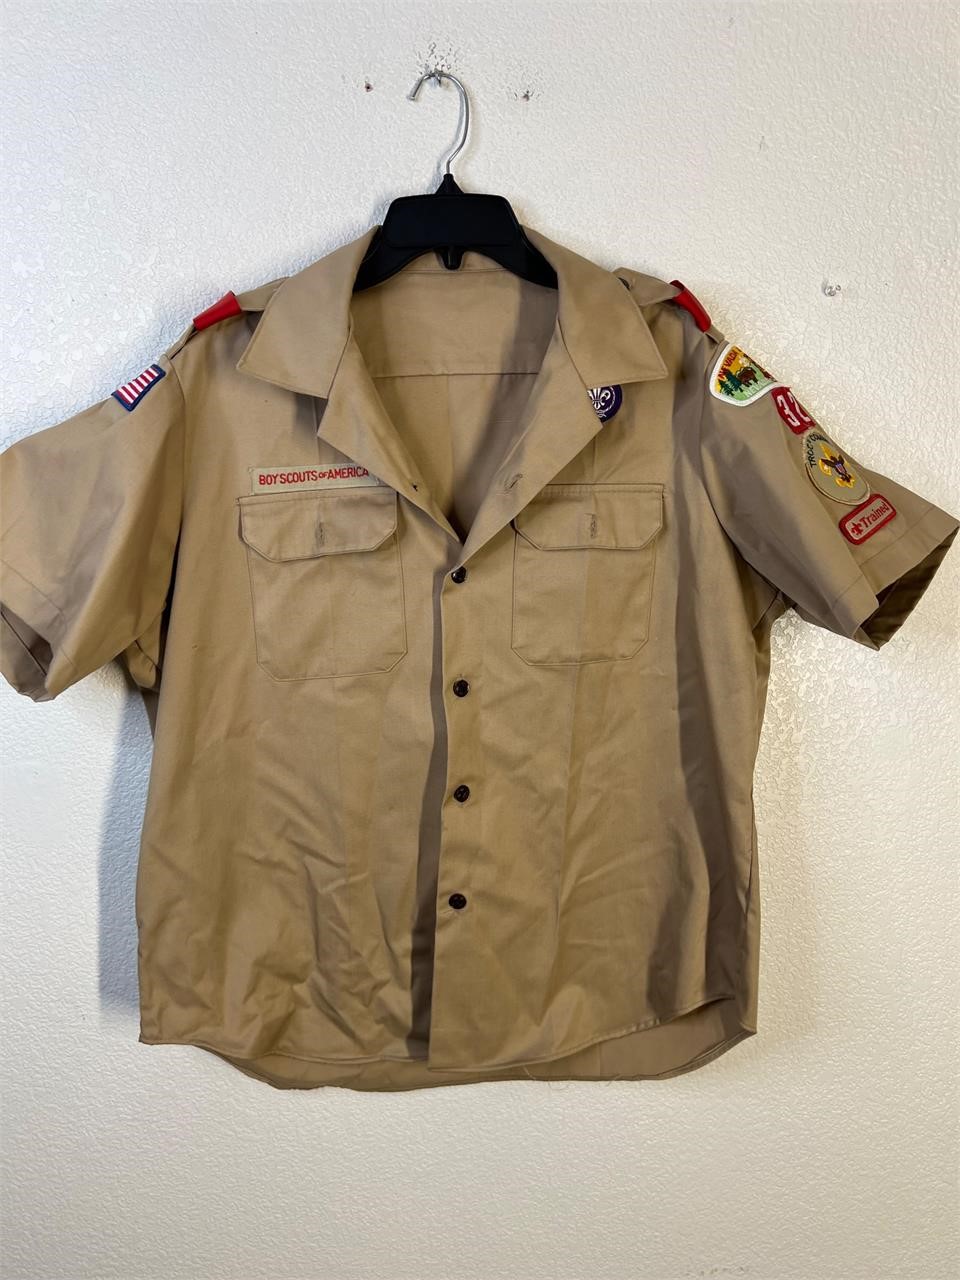 Vintage Boy Scouts of America Shirt Patches